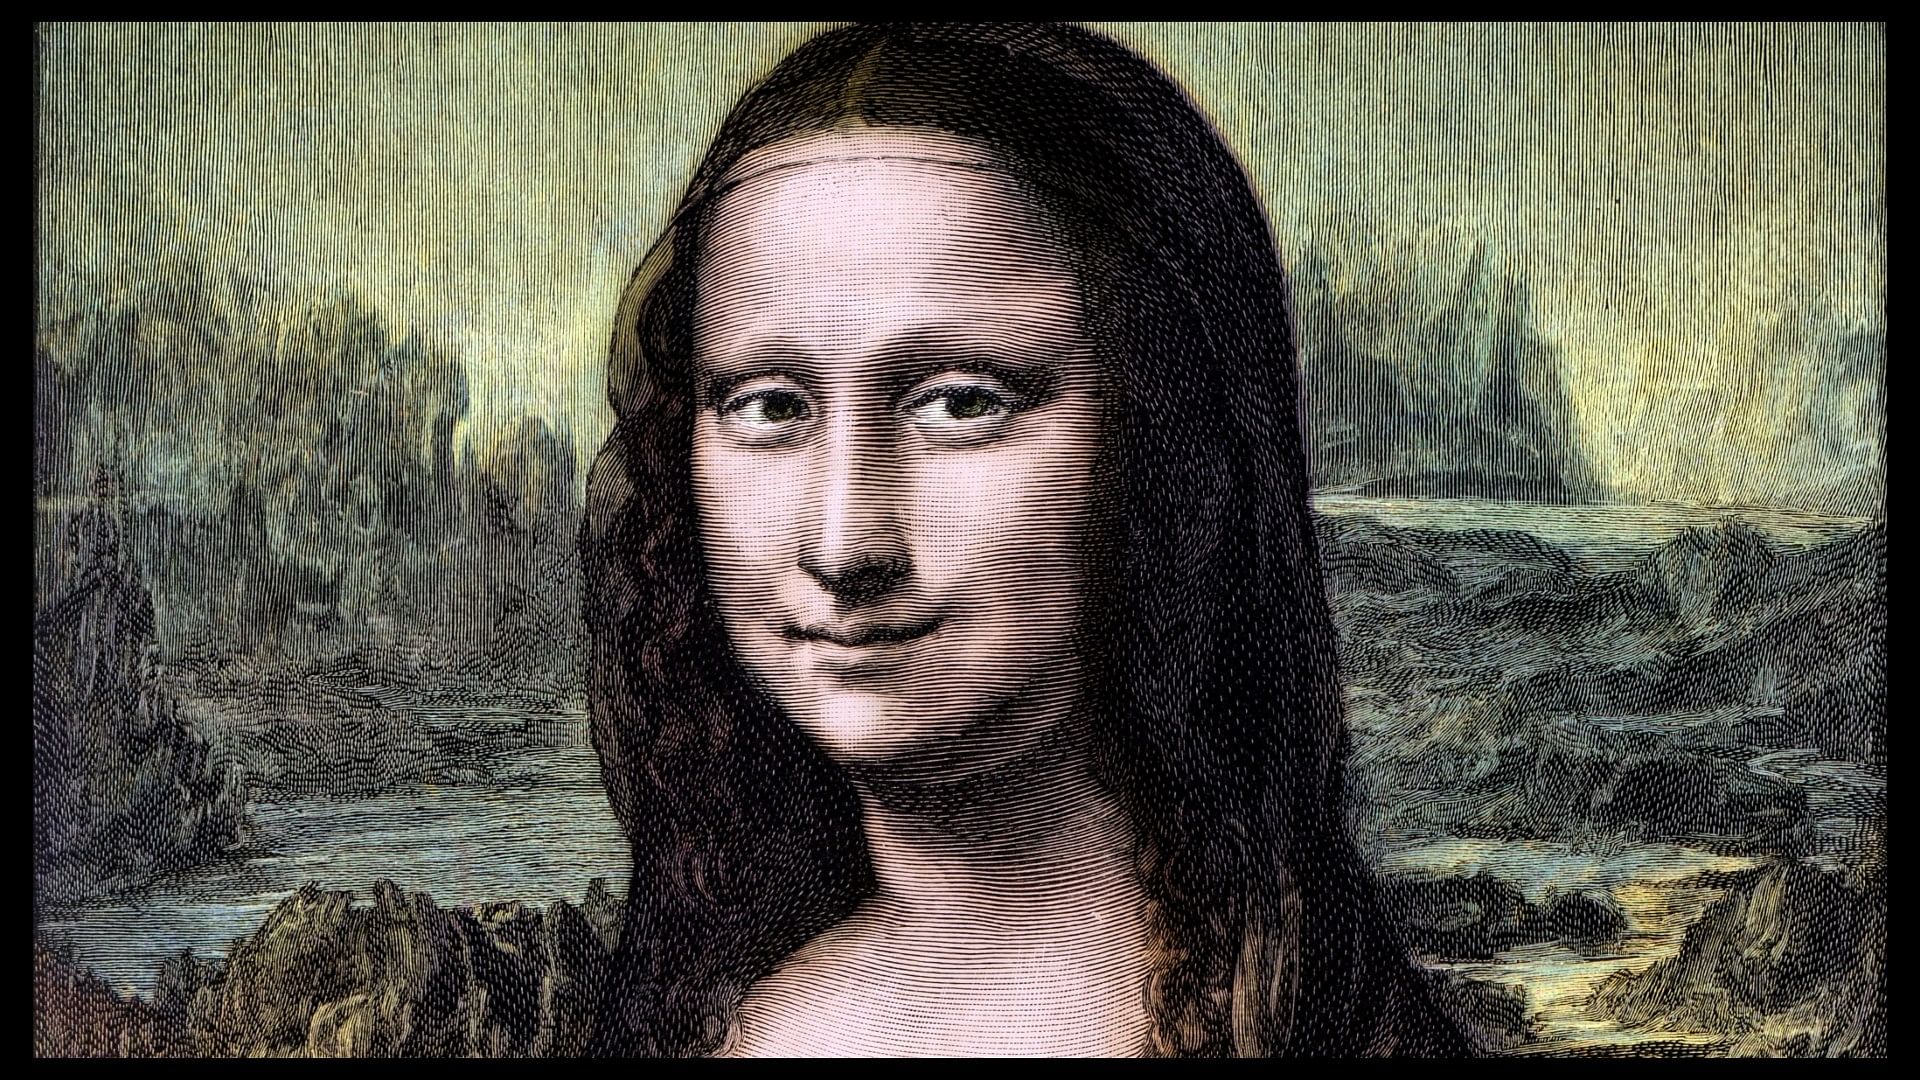 Monalisa painting singing video goes viral on social media ai generated this video